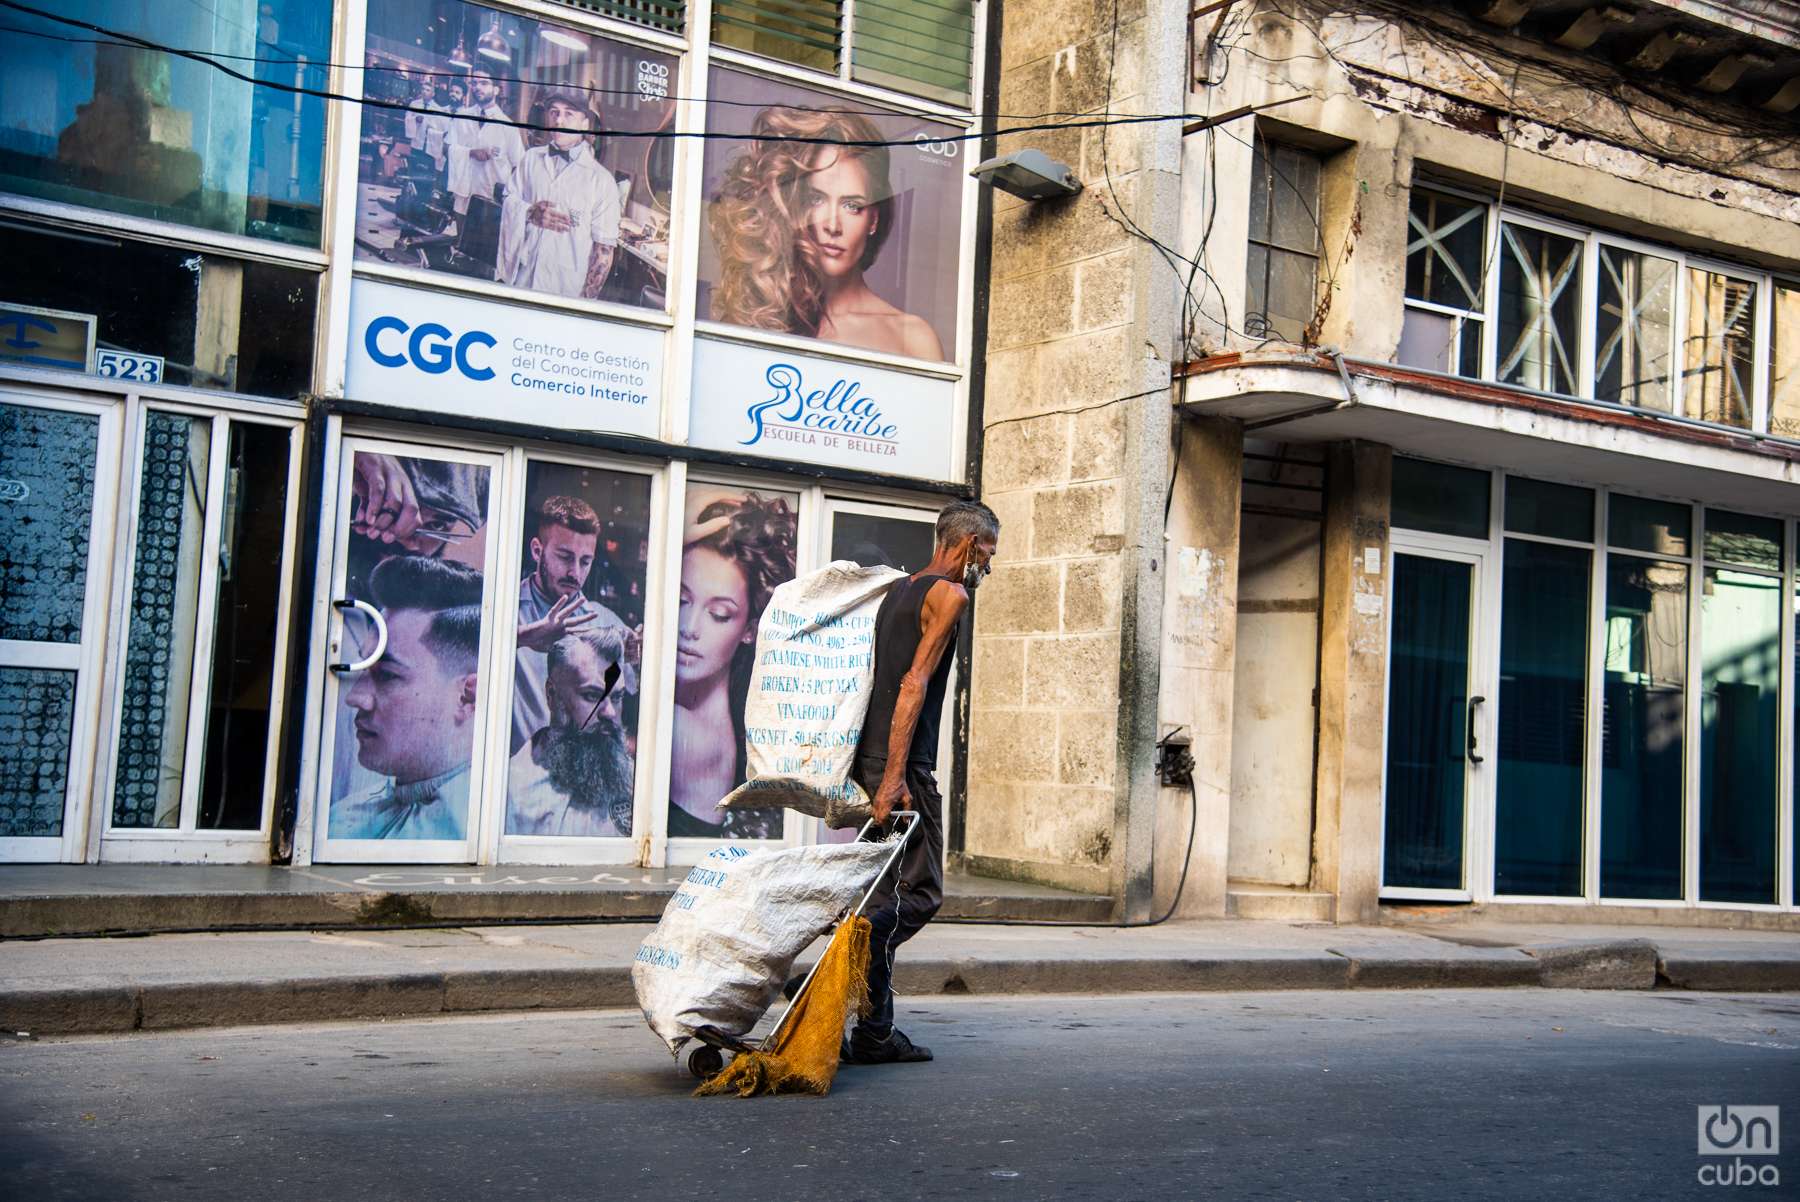 Cuban television and economic reality